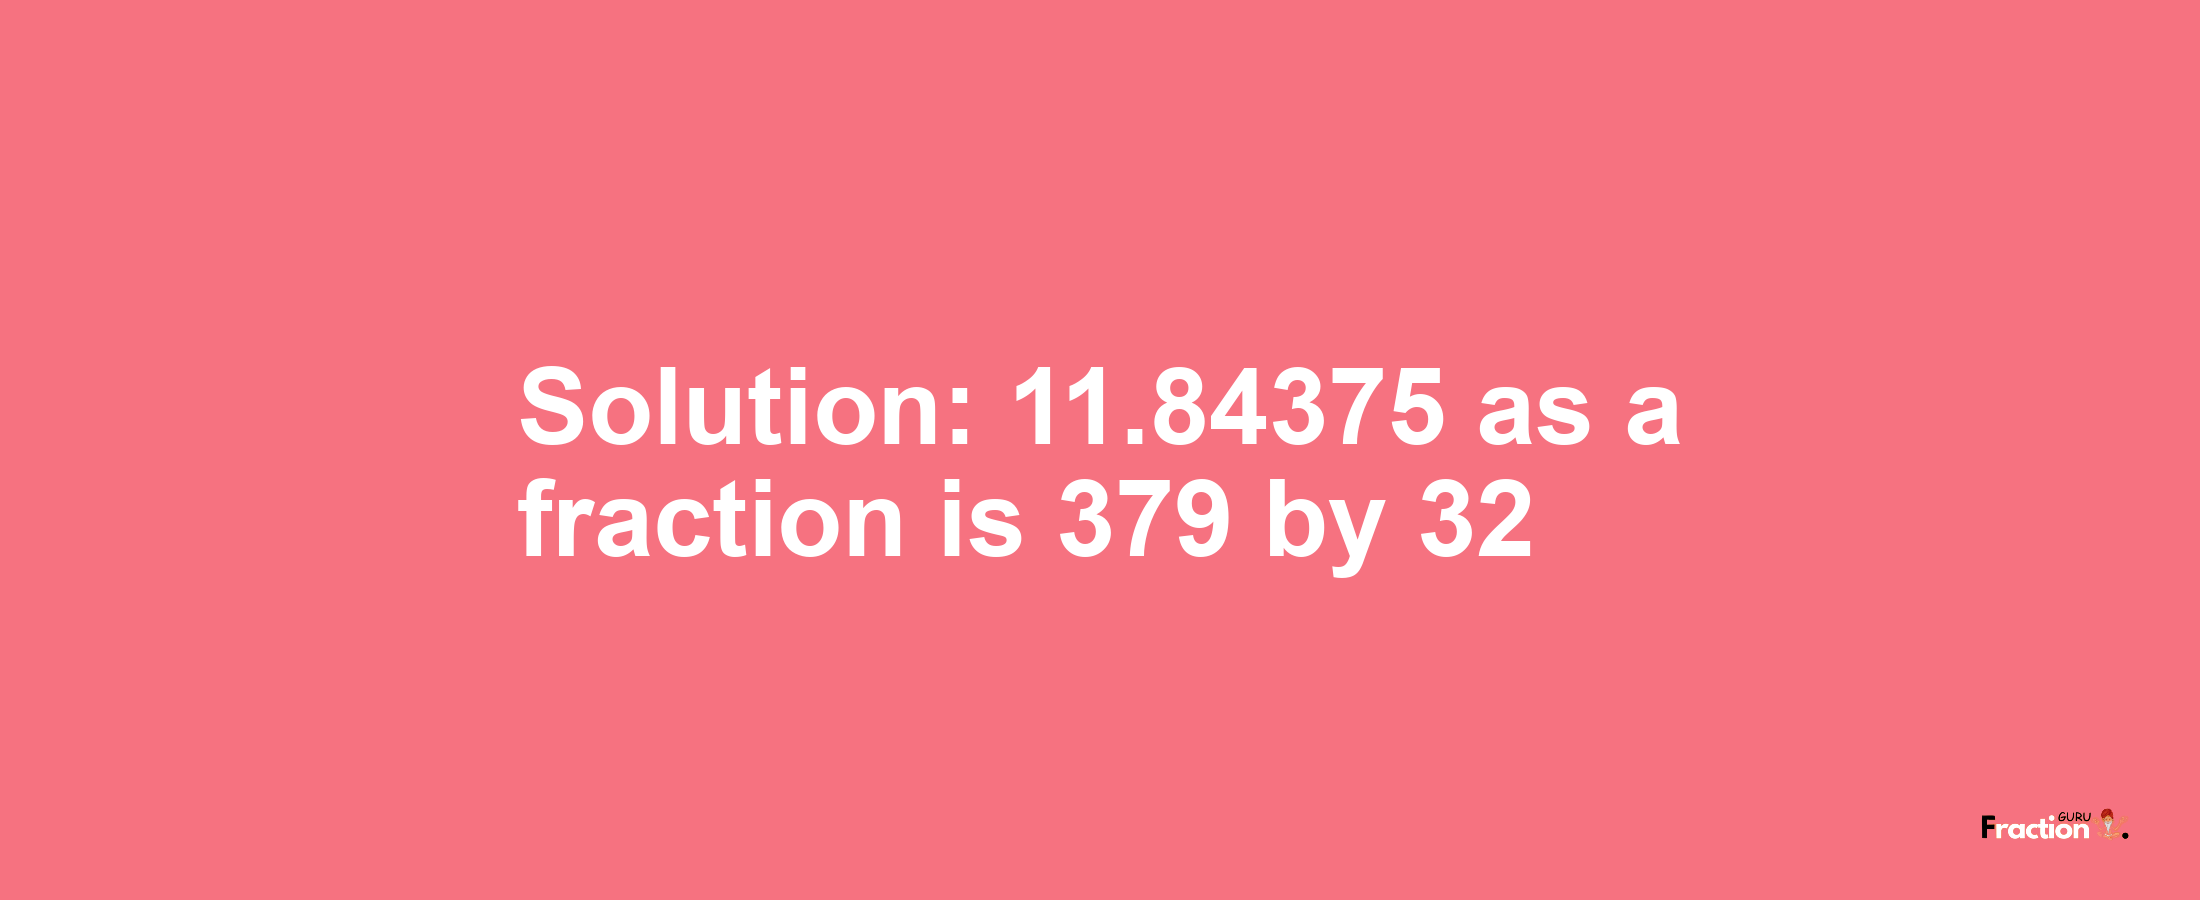 Solution:11.84375 as a fraction is 379/32